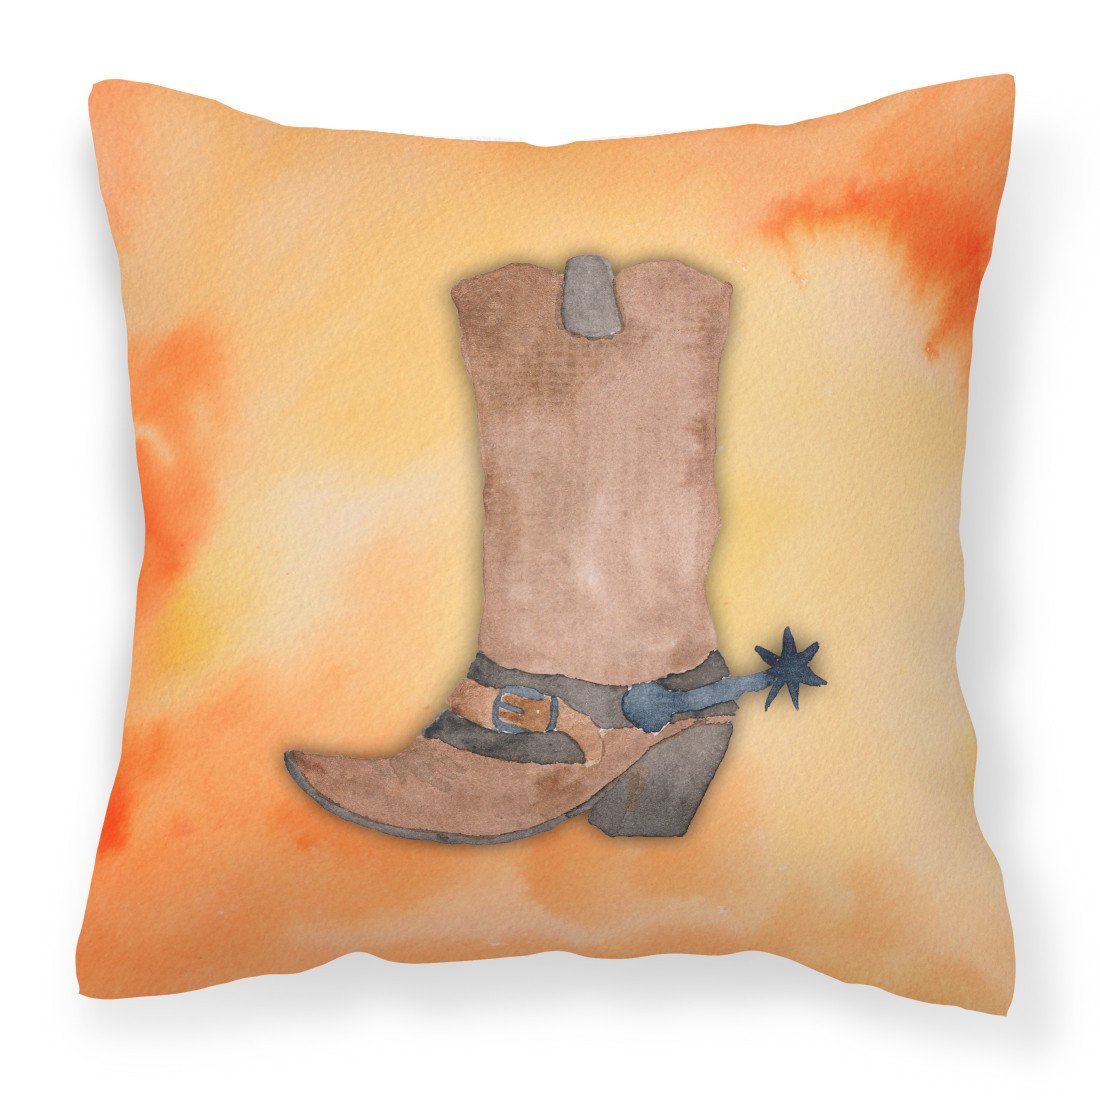 Cowboy Boot Watercolor Fabric Decorative Pillow BB7371PW1818 by Caroline's Treasures